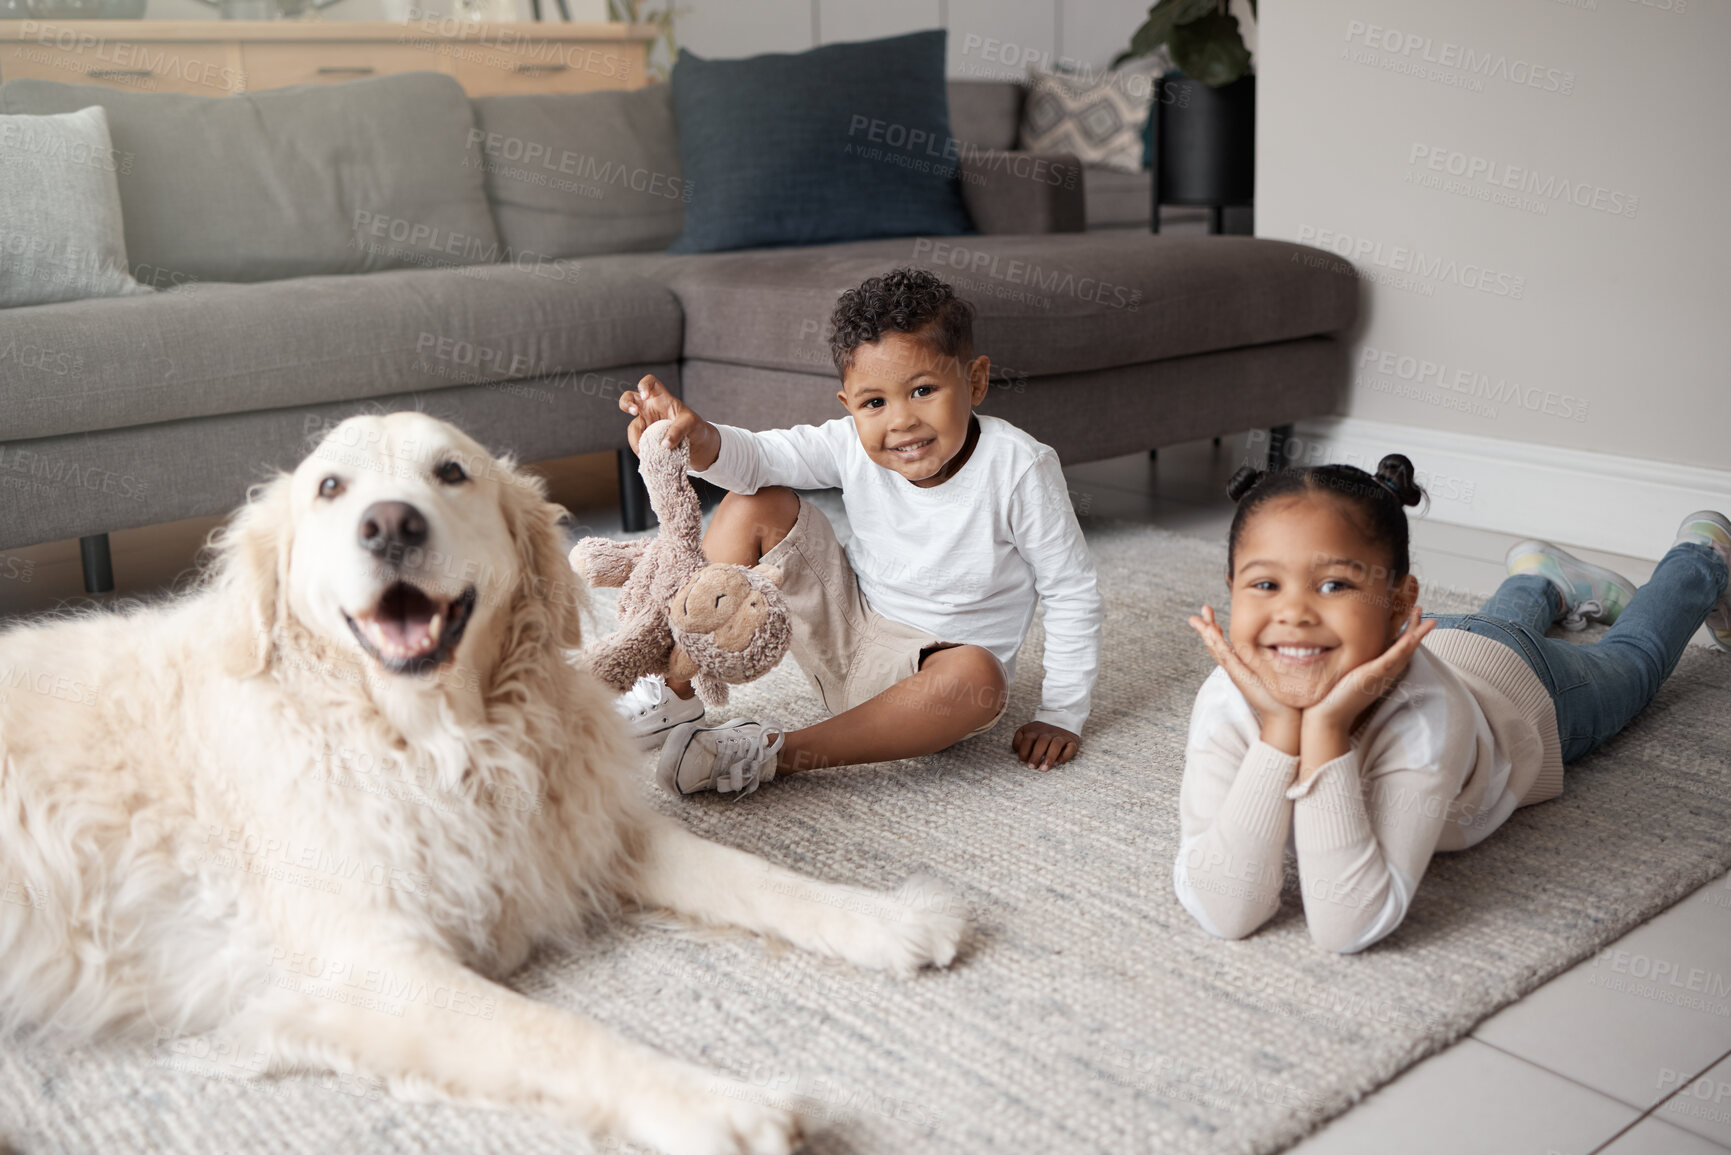 Buy stock photo Two young mixed race siblings playing on the lounge floor with their adopted dog. Two adorable children bonding with an animal rescue at home